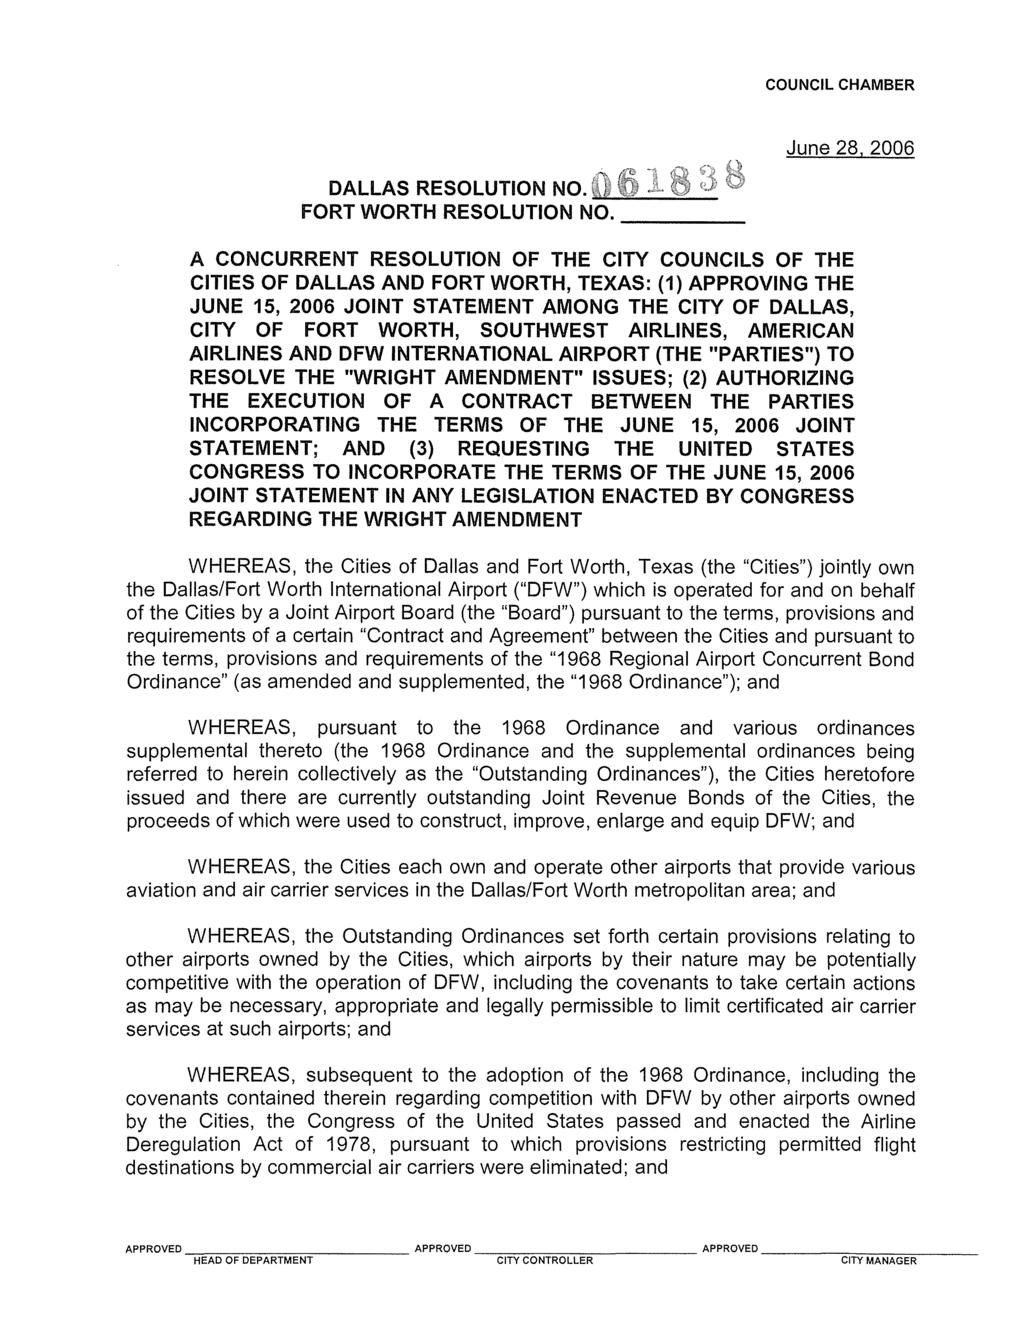 Case 3:15-cv-02069-K Document 1 Filed 06/17/15 Page 63 of 83 PageID 63 COUNCIL CHAMBER June 28, 2006 A CONCURRENT RESOLUTION OF THE CITY COUNCILS OF THE CITIES OF DALLAS AND FORT WORTH, TEXAS: (1)